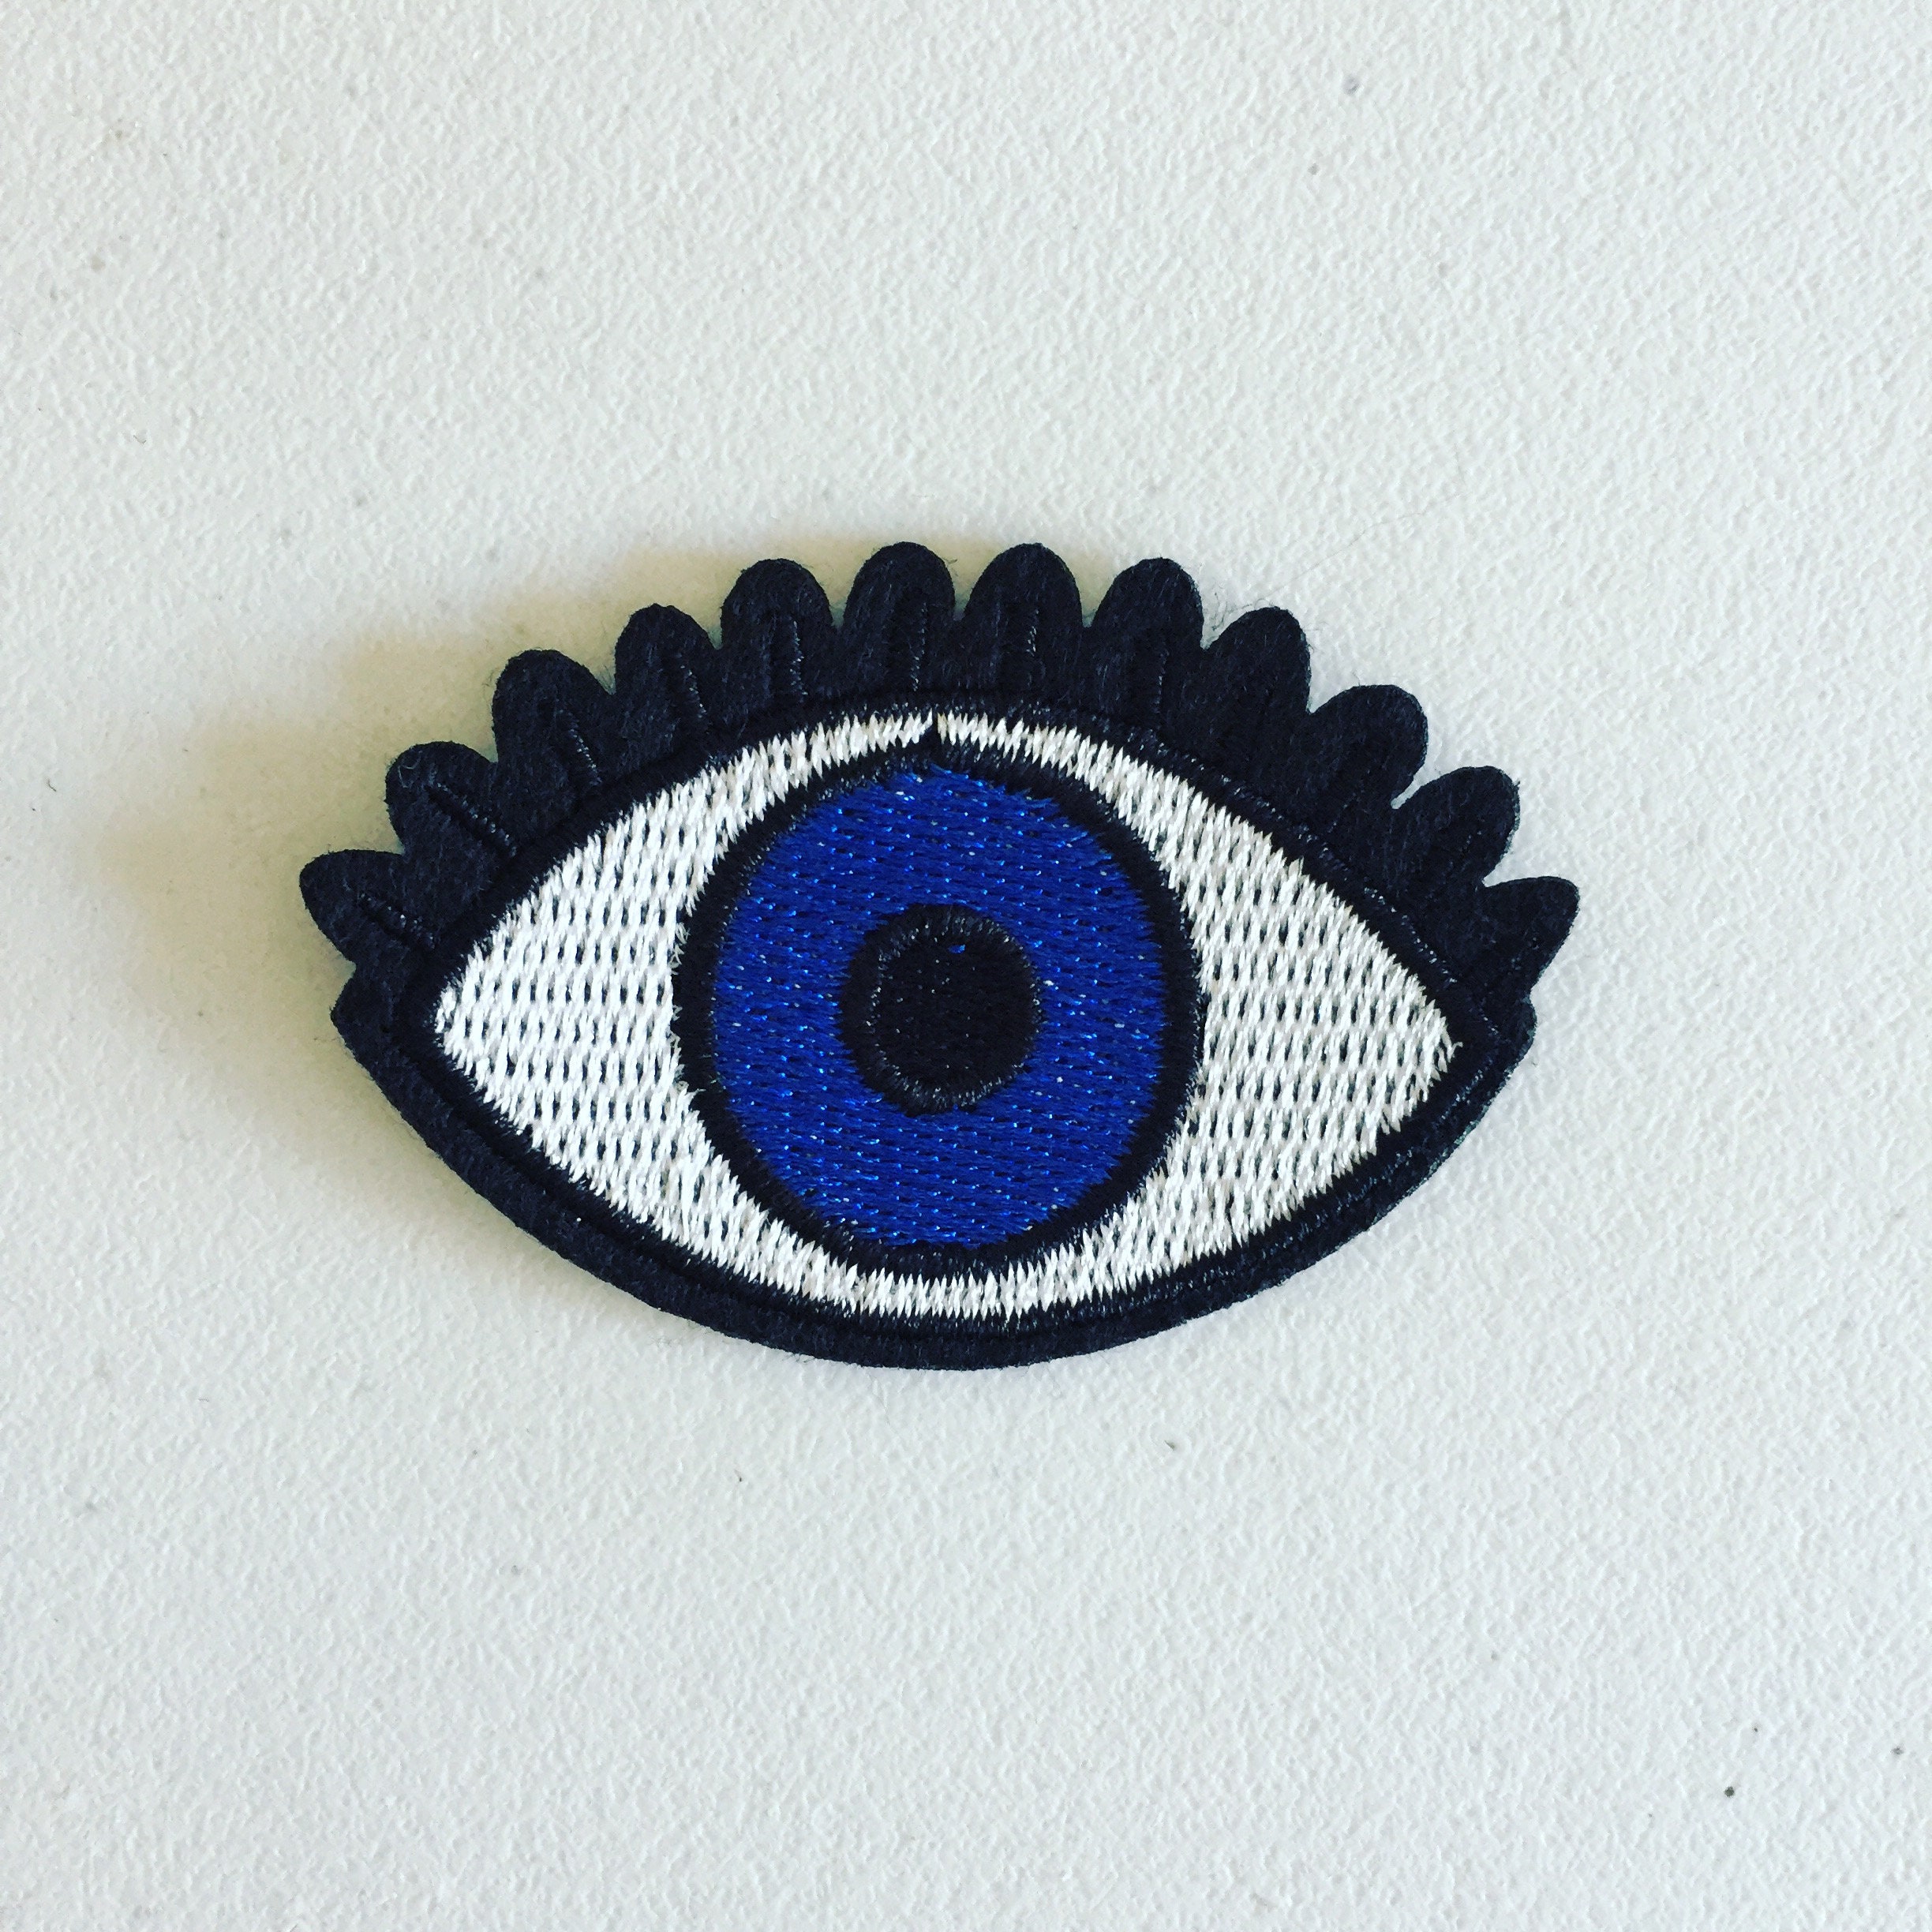 SMALL evil eye fabric, - protection fab